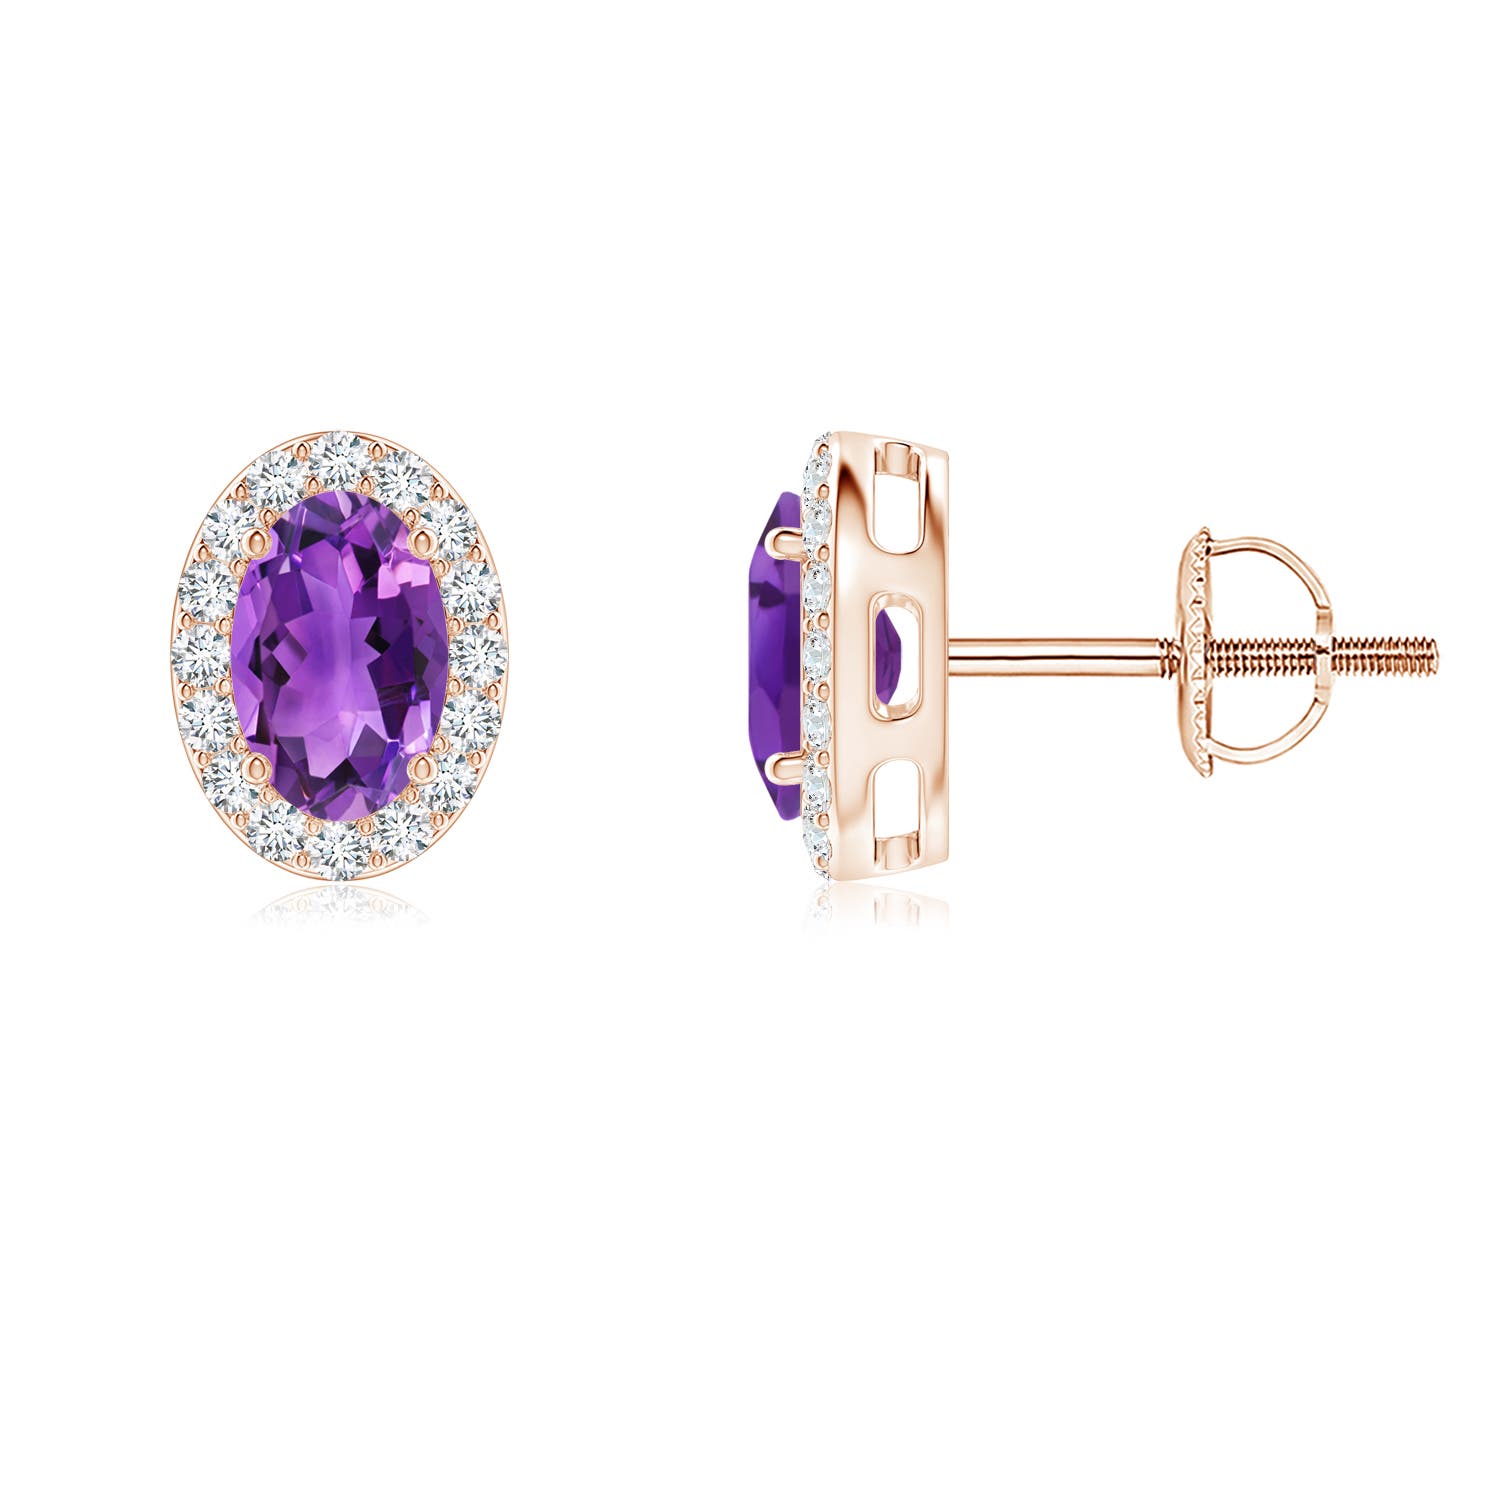 AAA - Amethyst / 0.99 CT / 14 KT Rose Gold